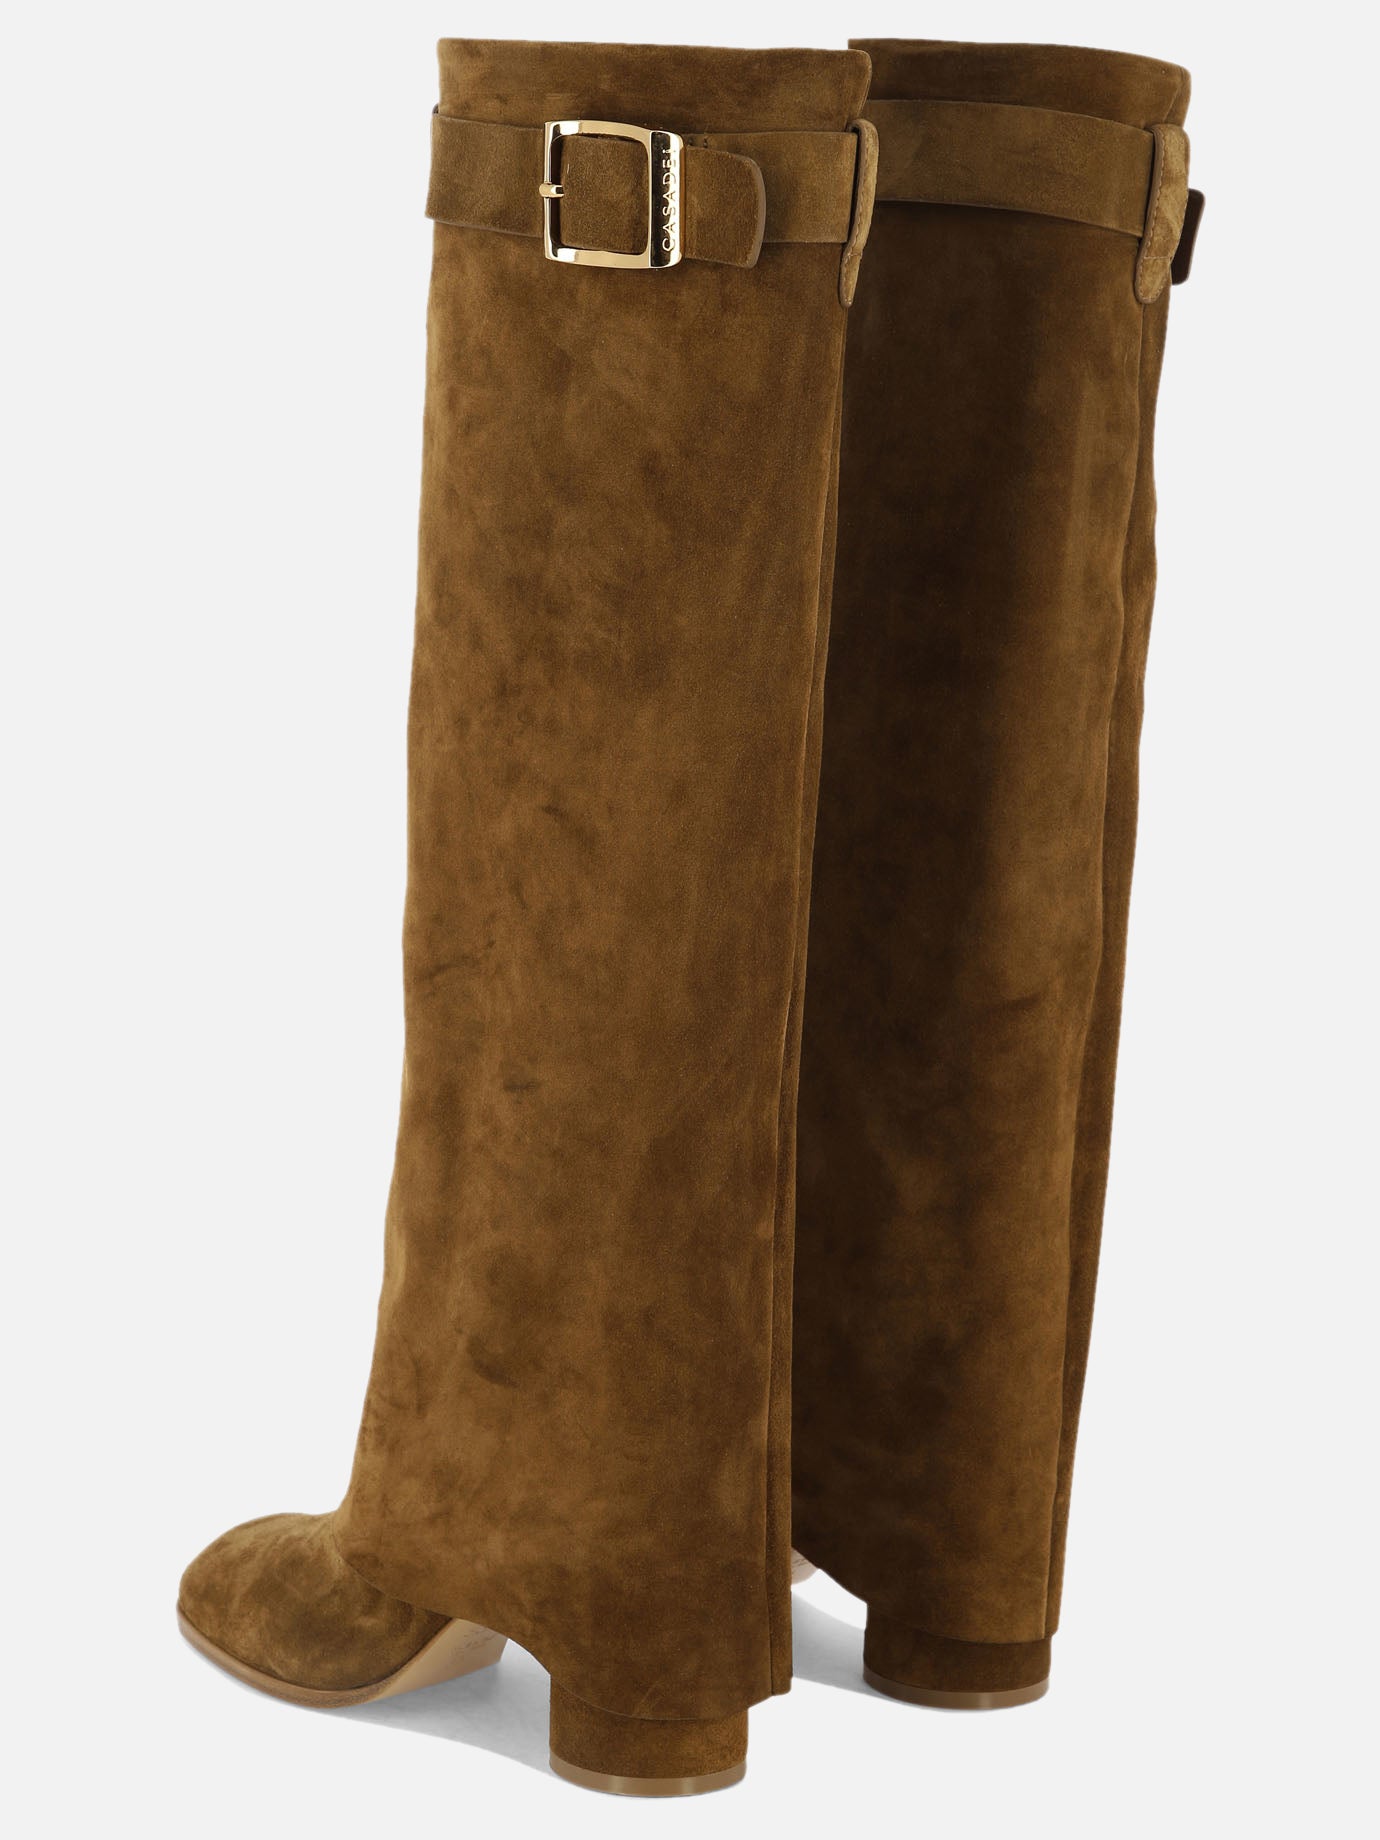 "Nomad" boots